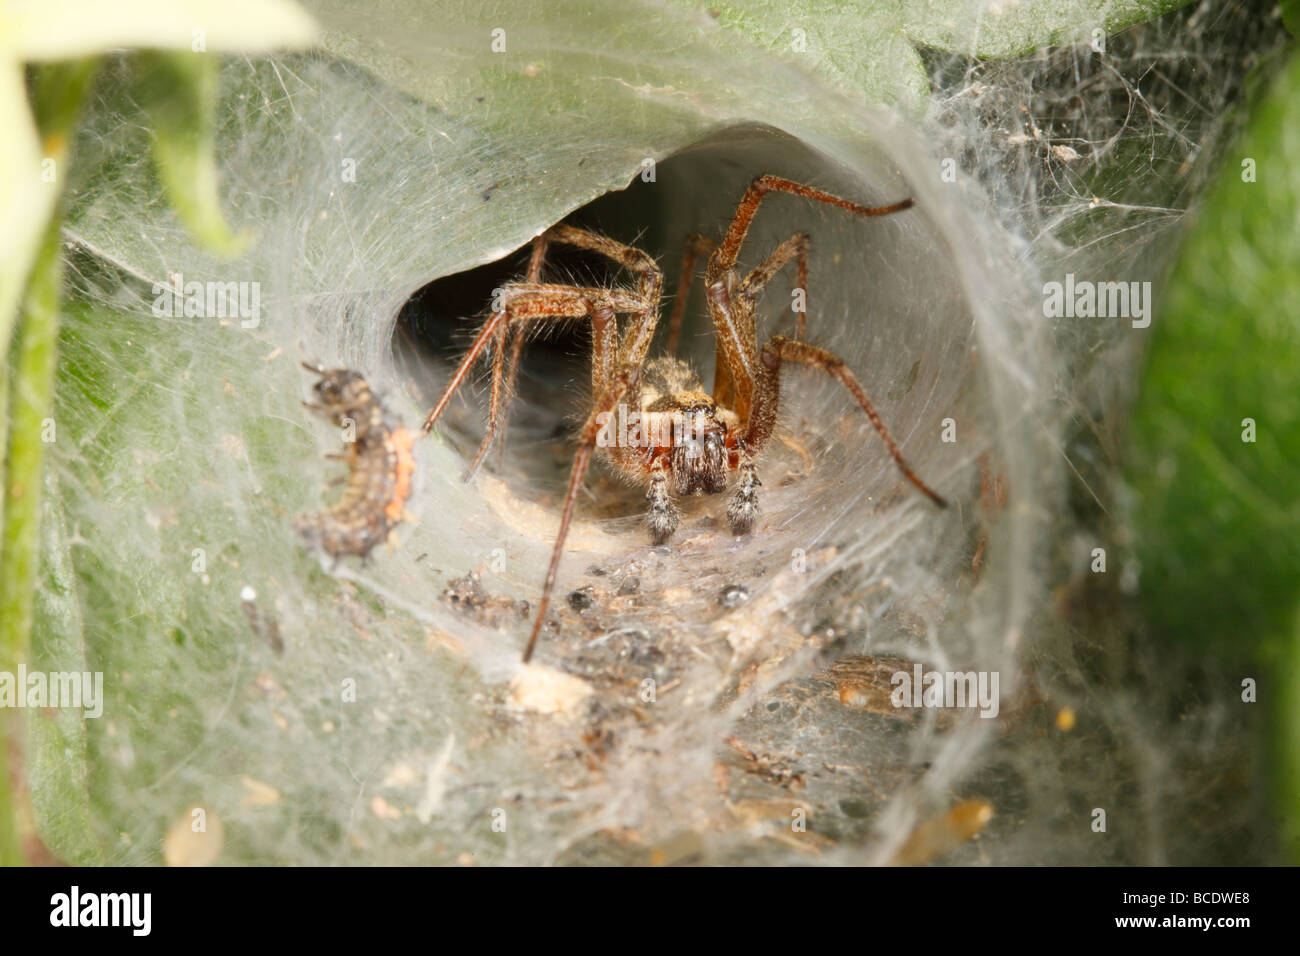 Labyrinth Spider approaching a ladybird Larva trapped in its web Stock Photo